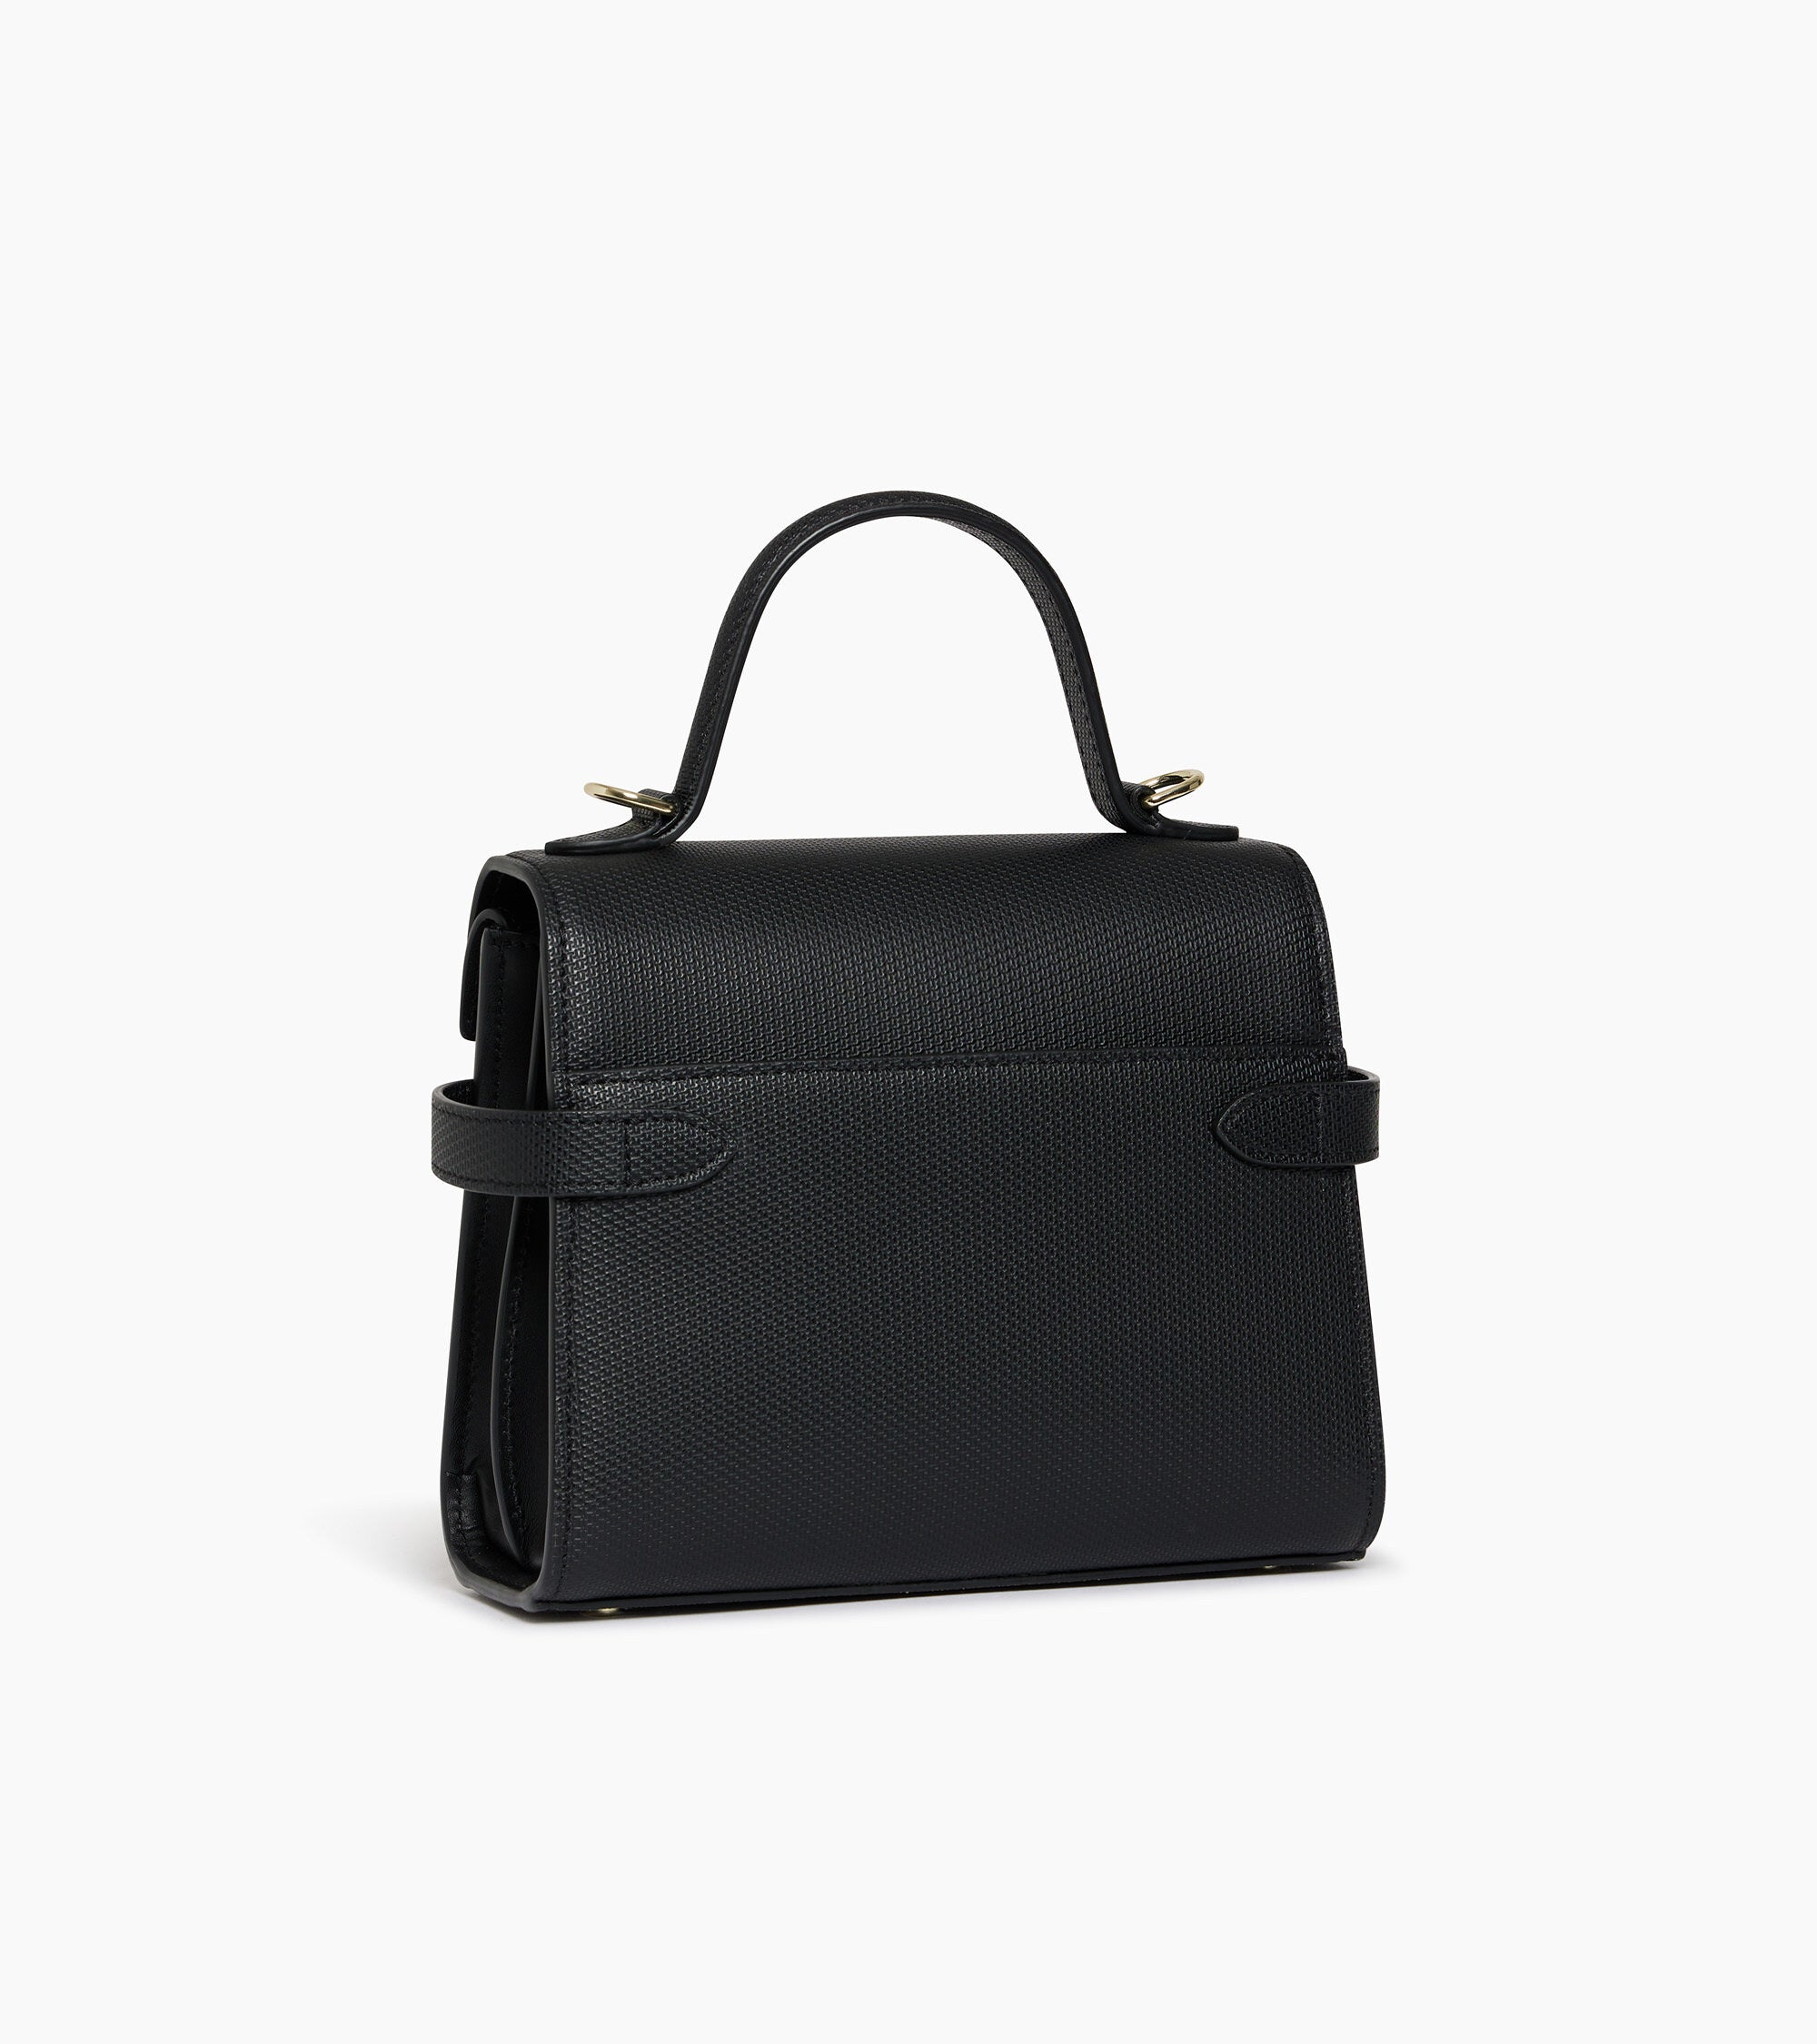 Emilie small double flap handbag in T signature leather